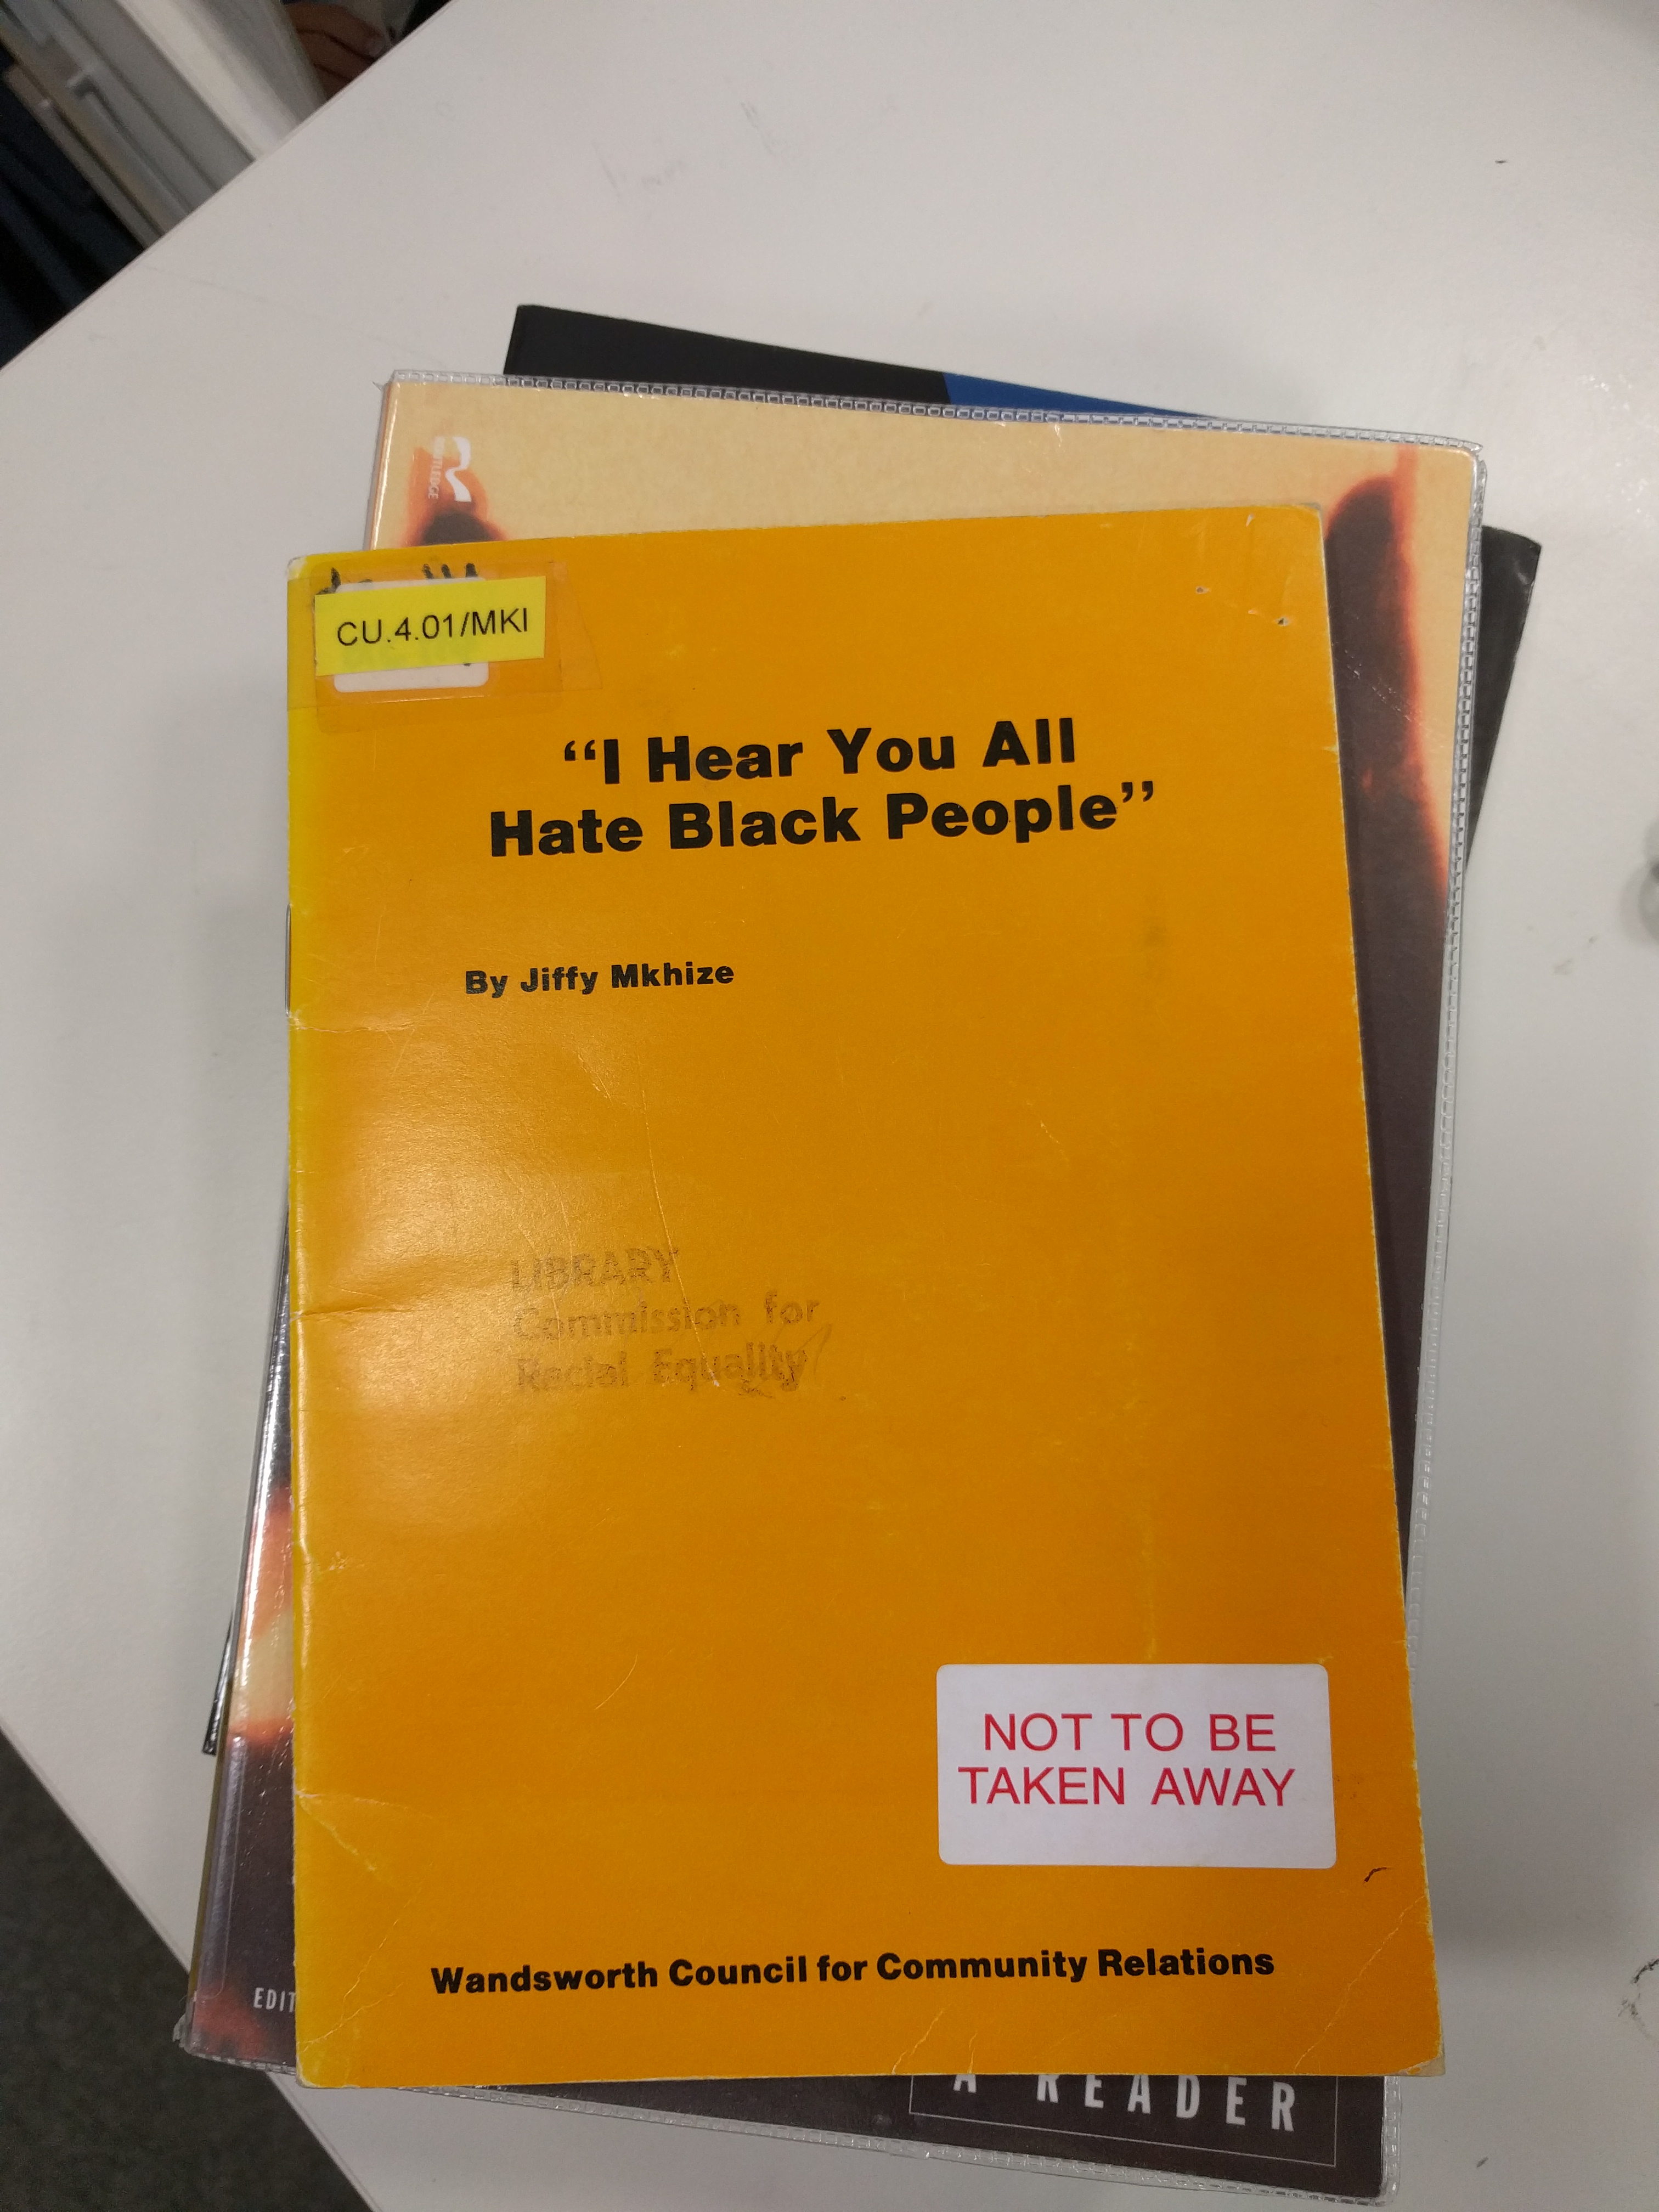 Book cover with not to be taken away label